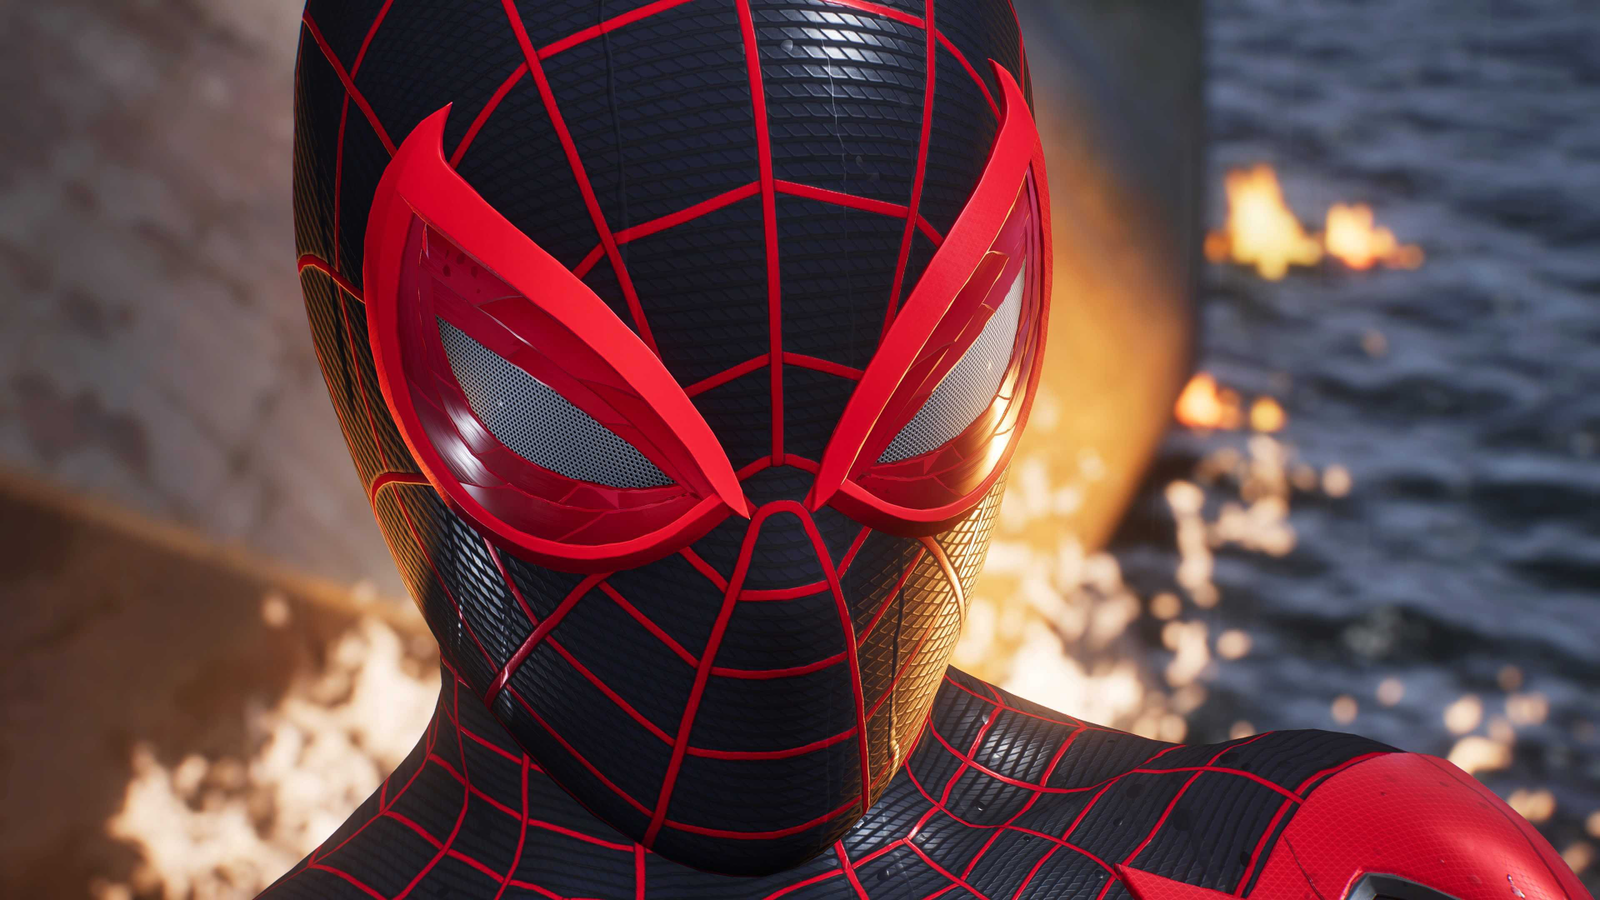 Marvel's Spider-Man: Miles Morales post-credits scenes explained